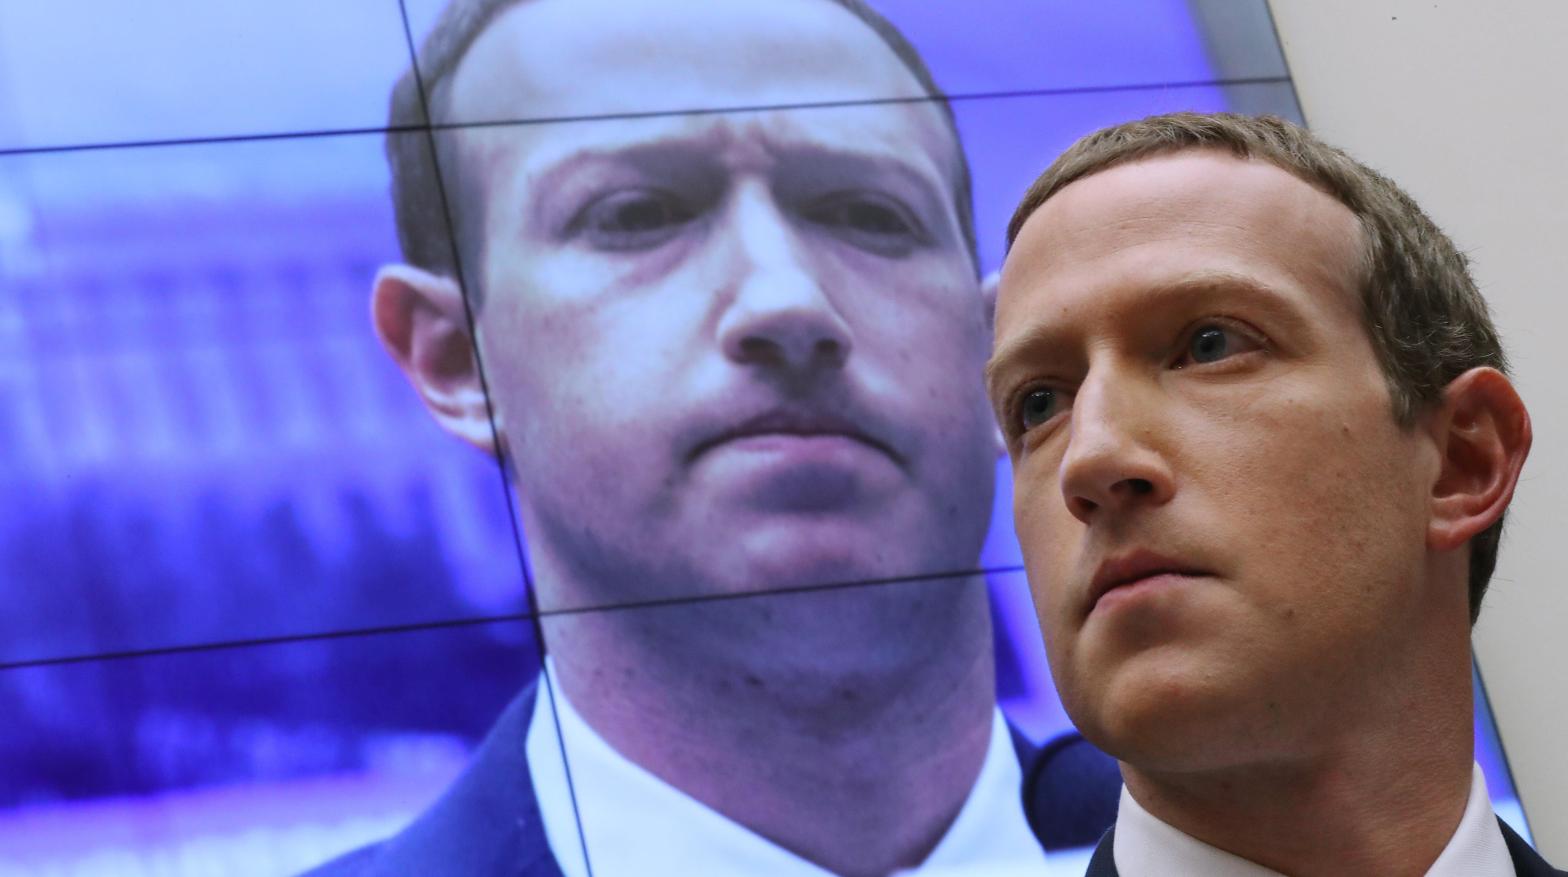 Meta CEO Mark Zuckerberg announced another round of massive layoffs Tuesday impacting both tech and business teams. (Photo: Chip Somodevilla, Getty Images)